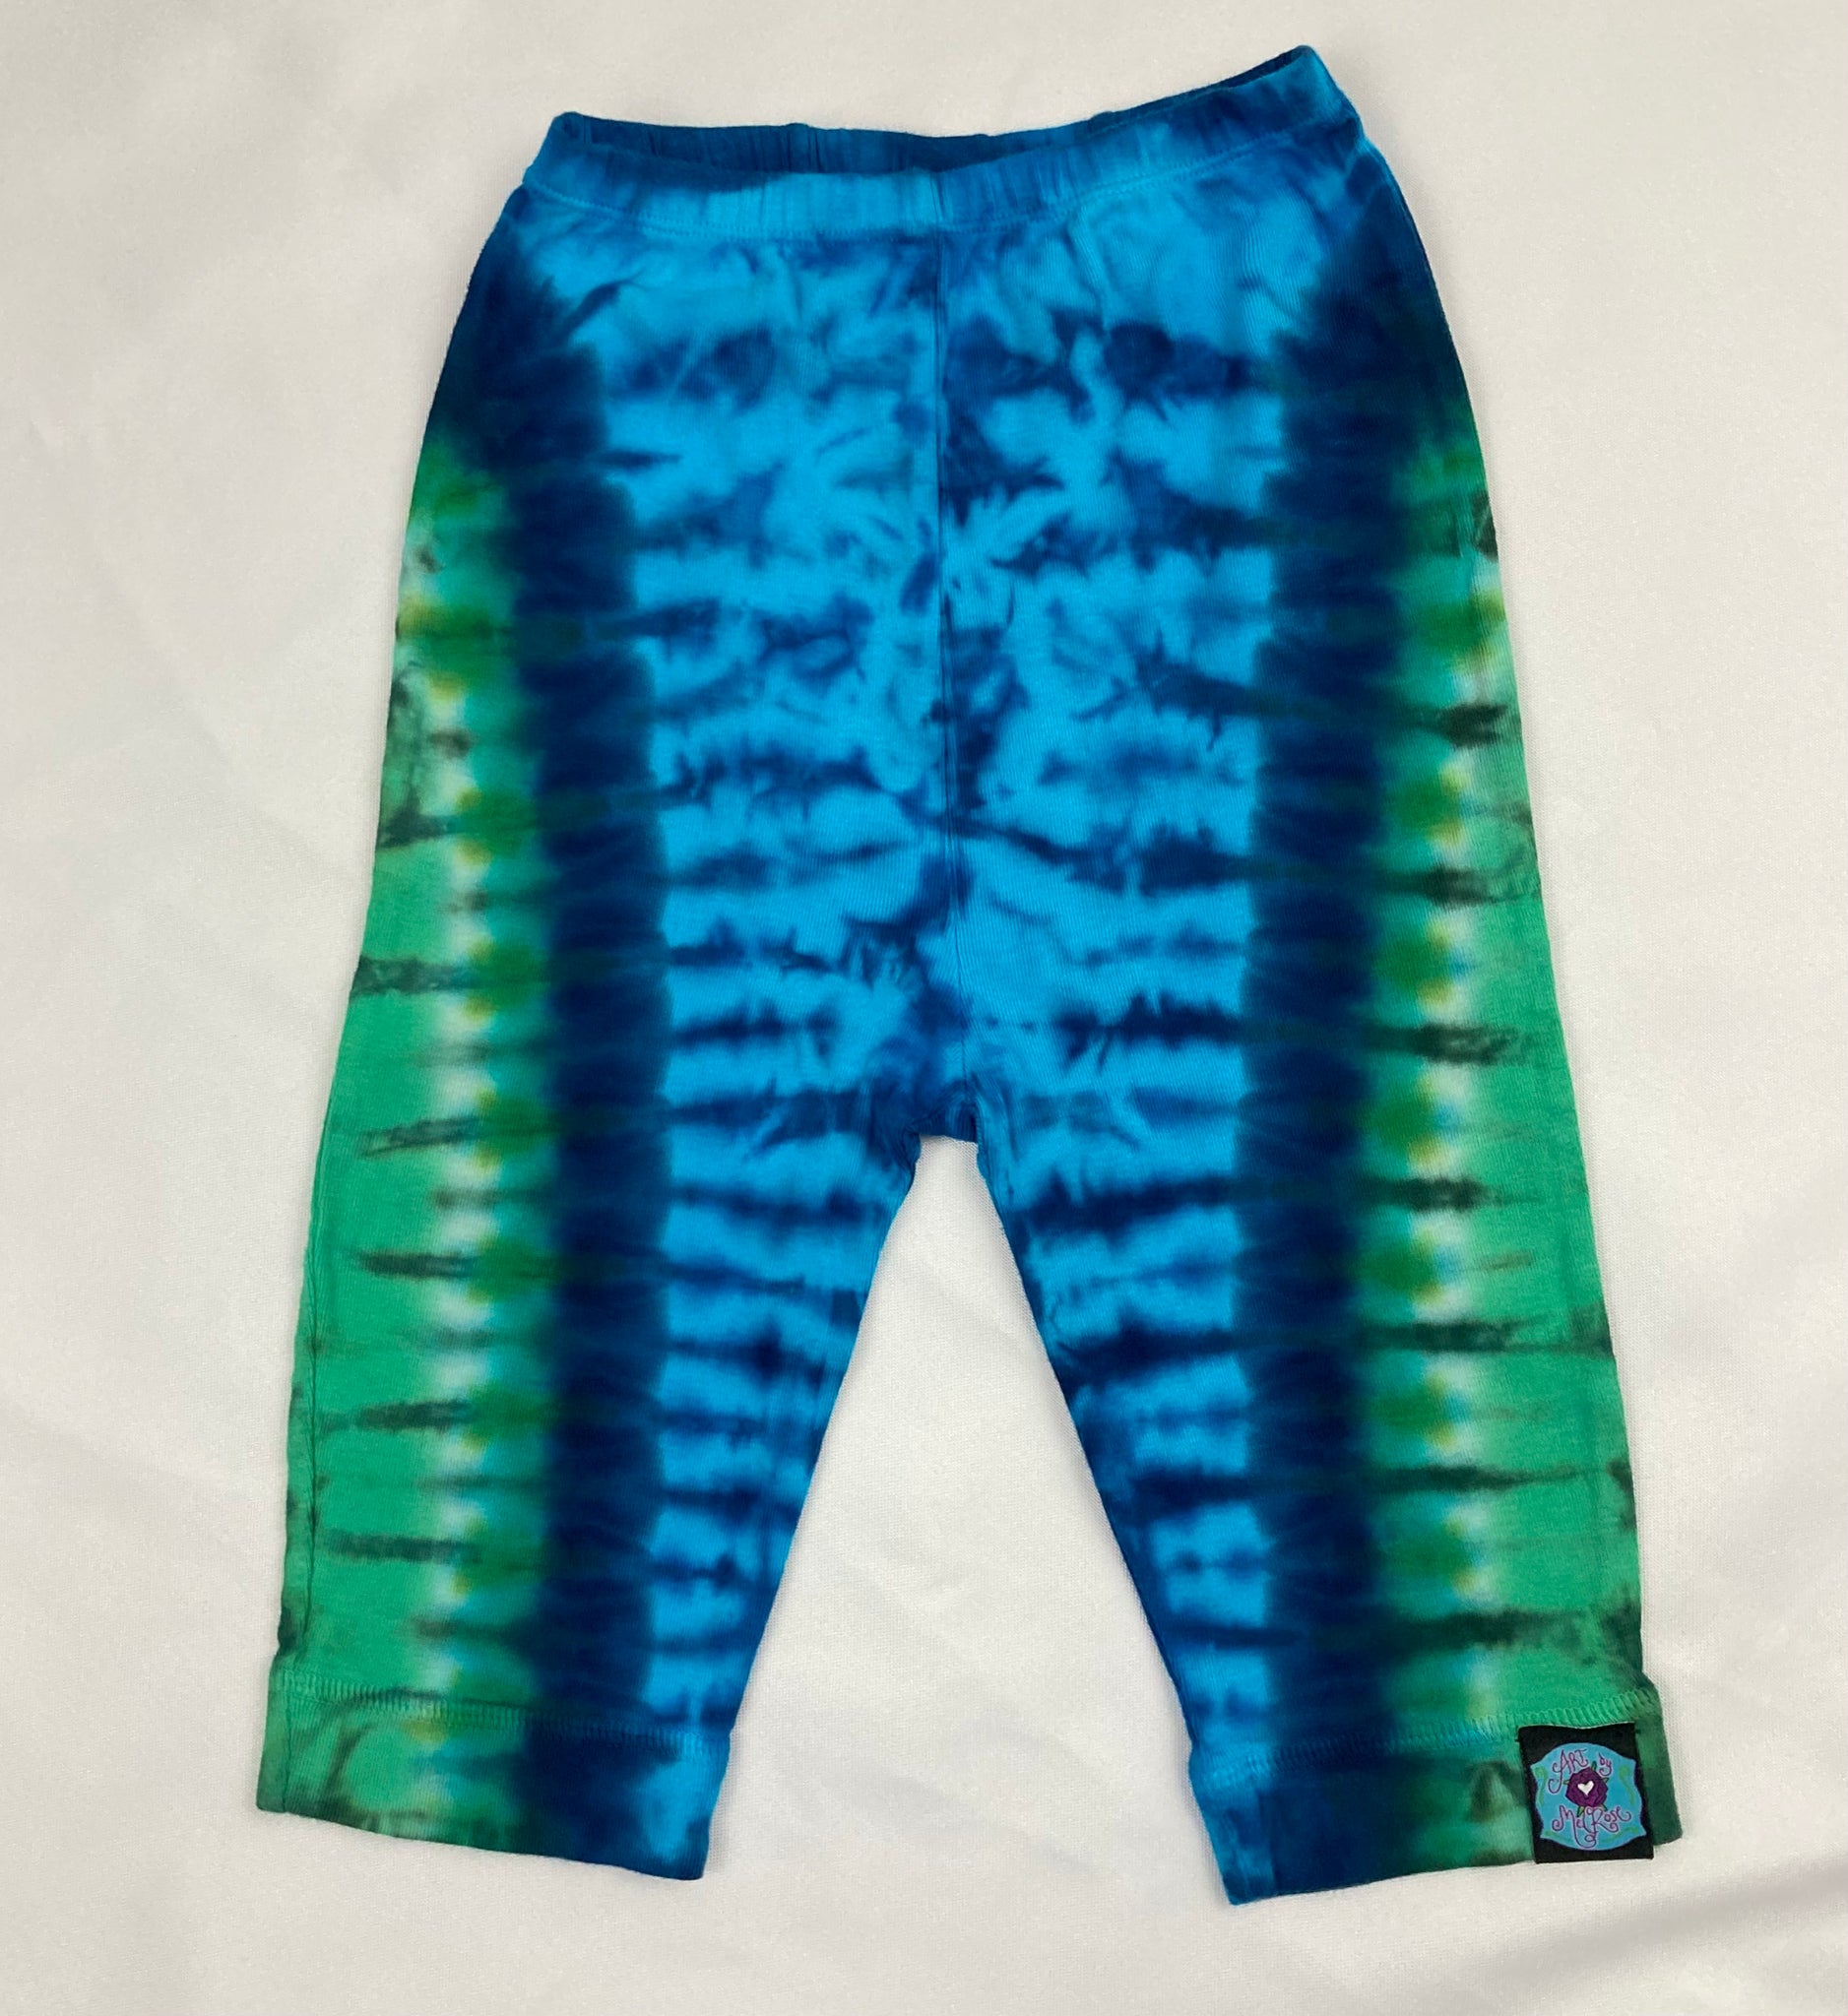 Baby Blue/Green Tie-Dyed Pants, 18M